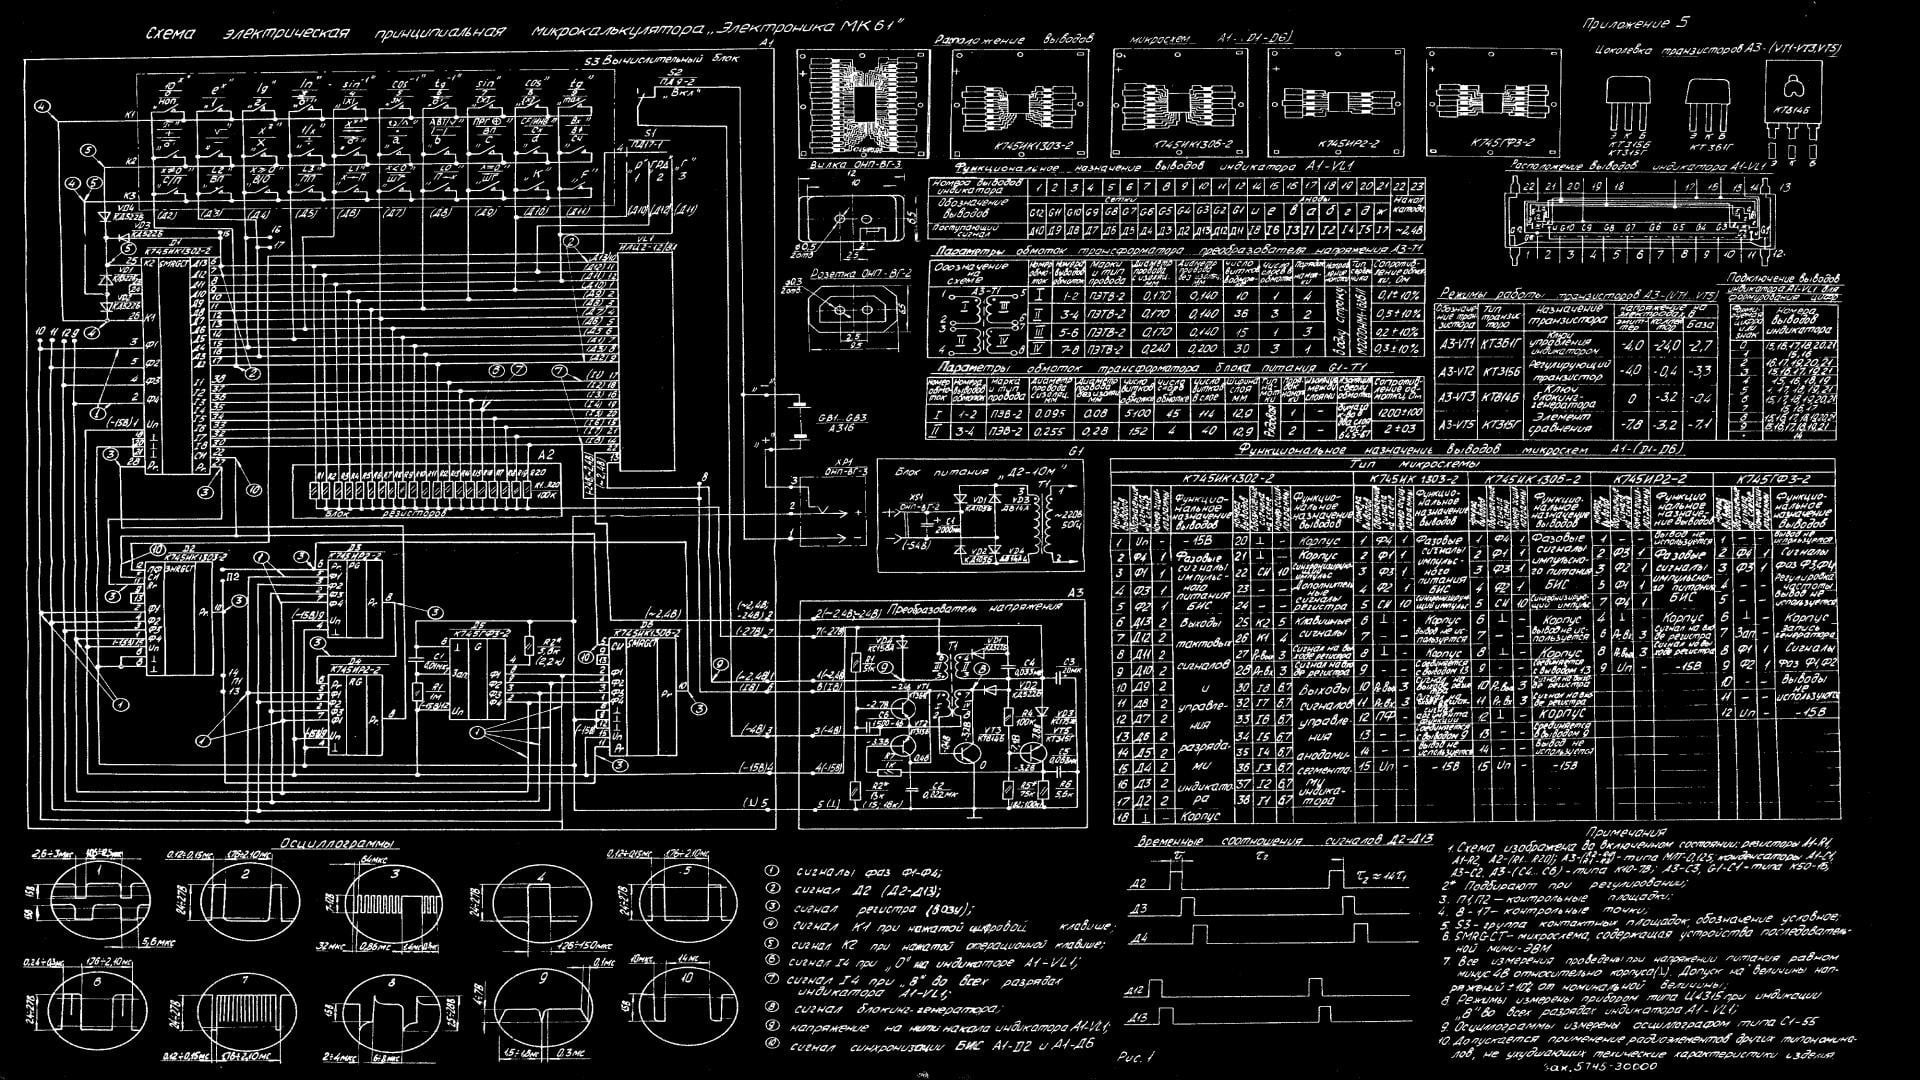 circuit diagram, microchip, integrated circuits, waveforms, schematic